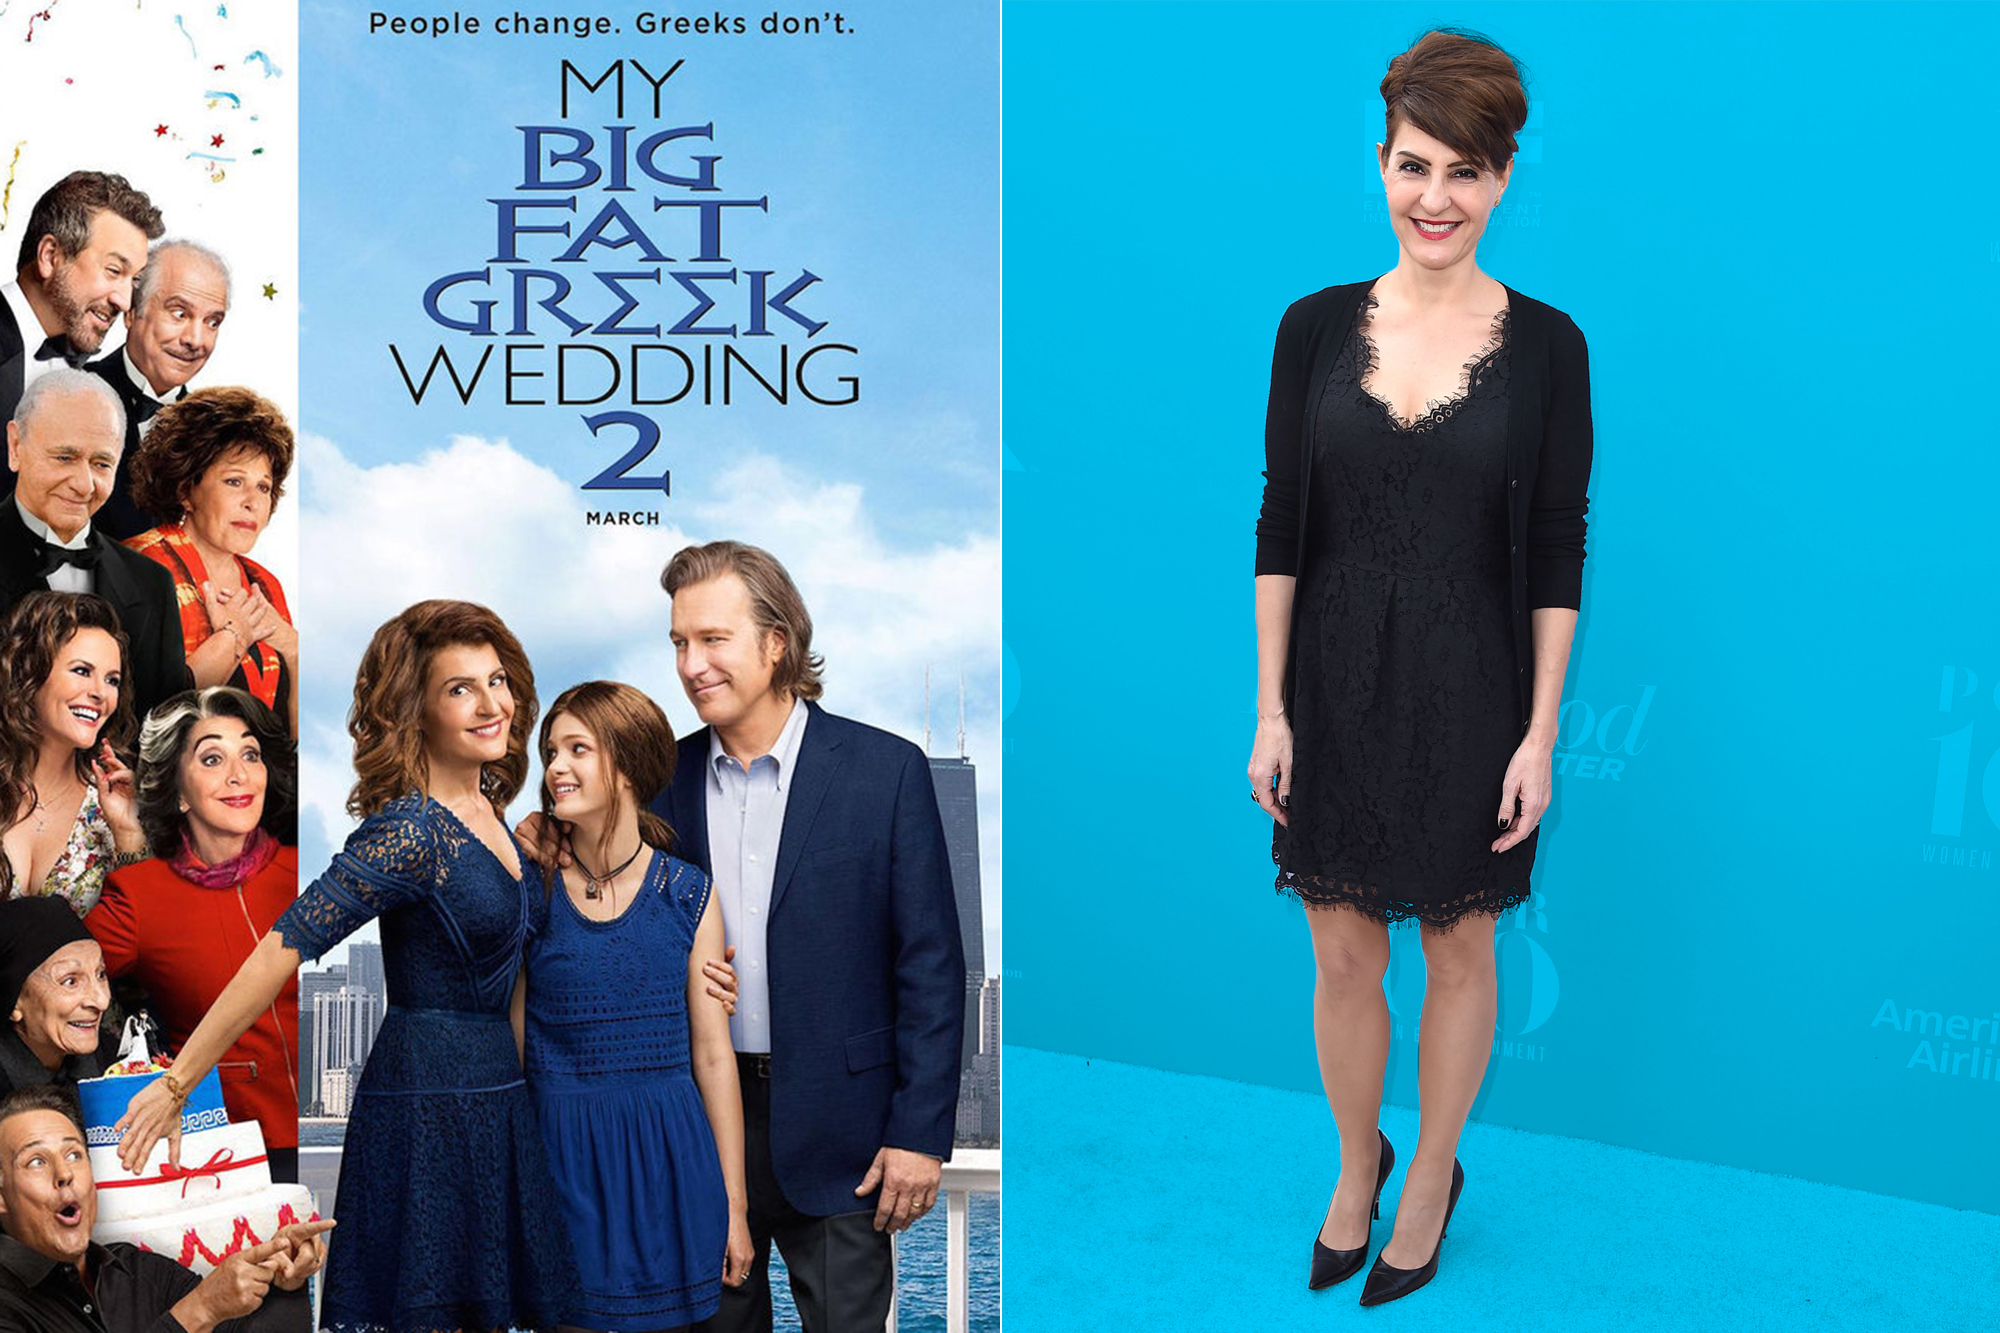 Fourteen years after she released the original film, Nia Vardalos is writing My Big Fat Greek Wedding 2. Release date: March 25